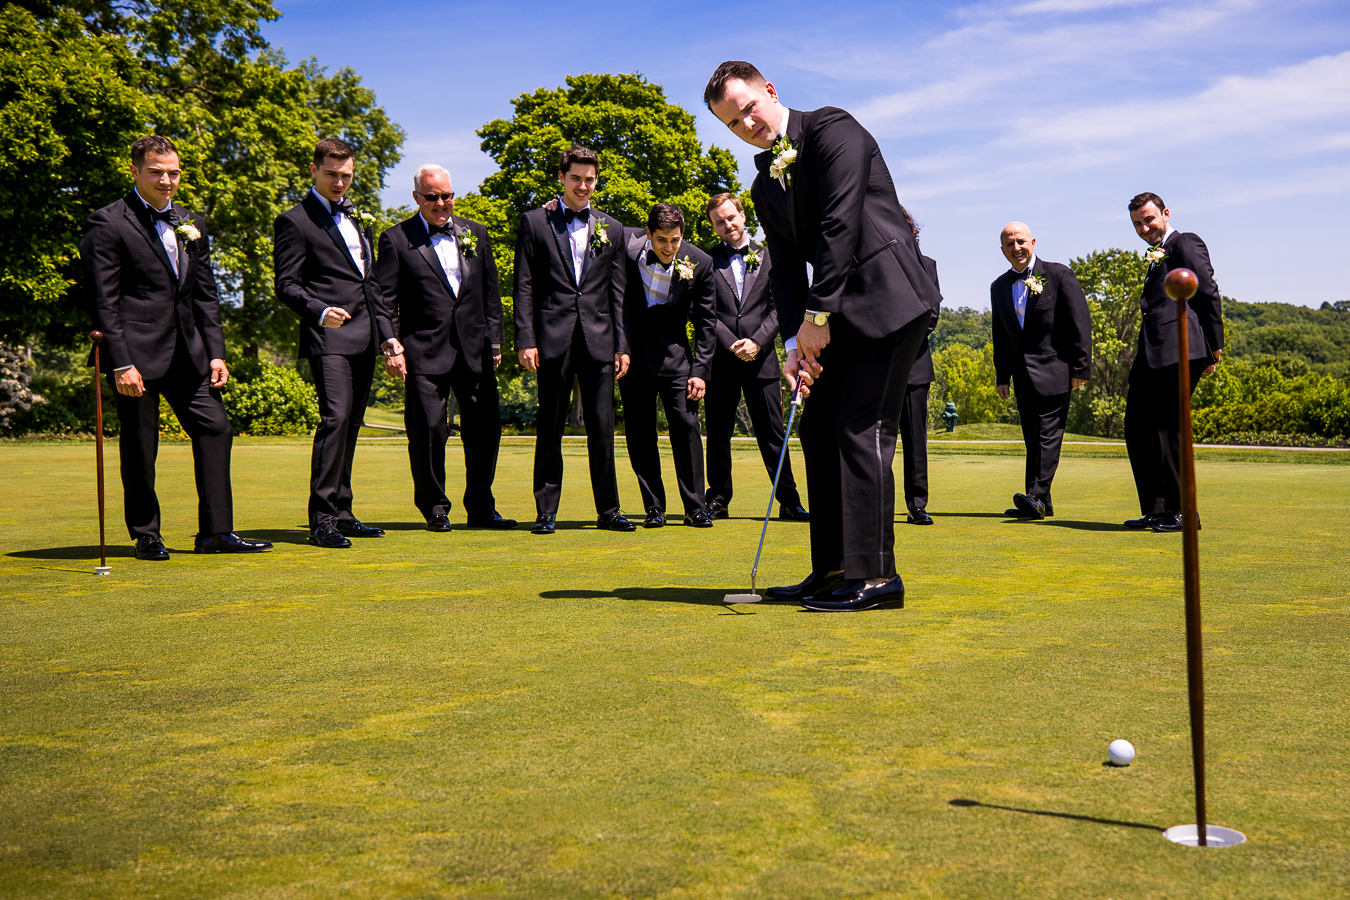 Country Club of York Wedding photographer, lisa rhinehart, captures this creative wedding party image of guys golfing together on the green before the ceremony 